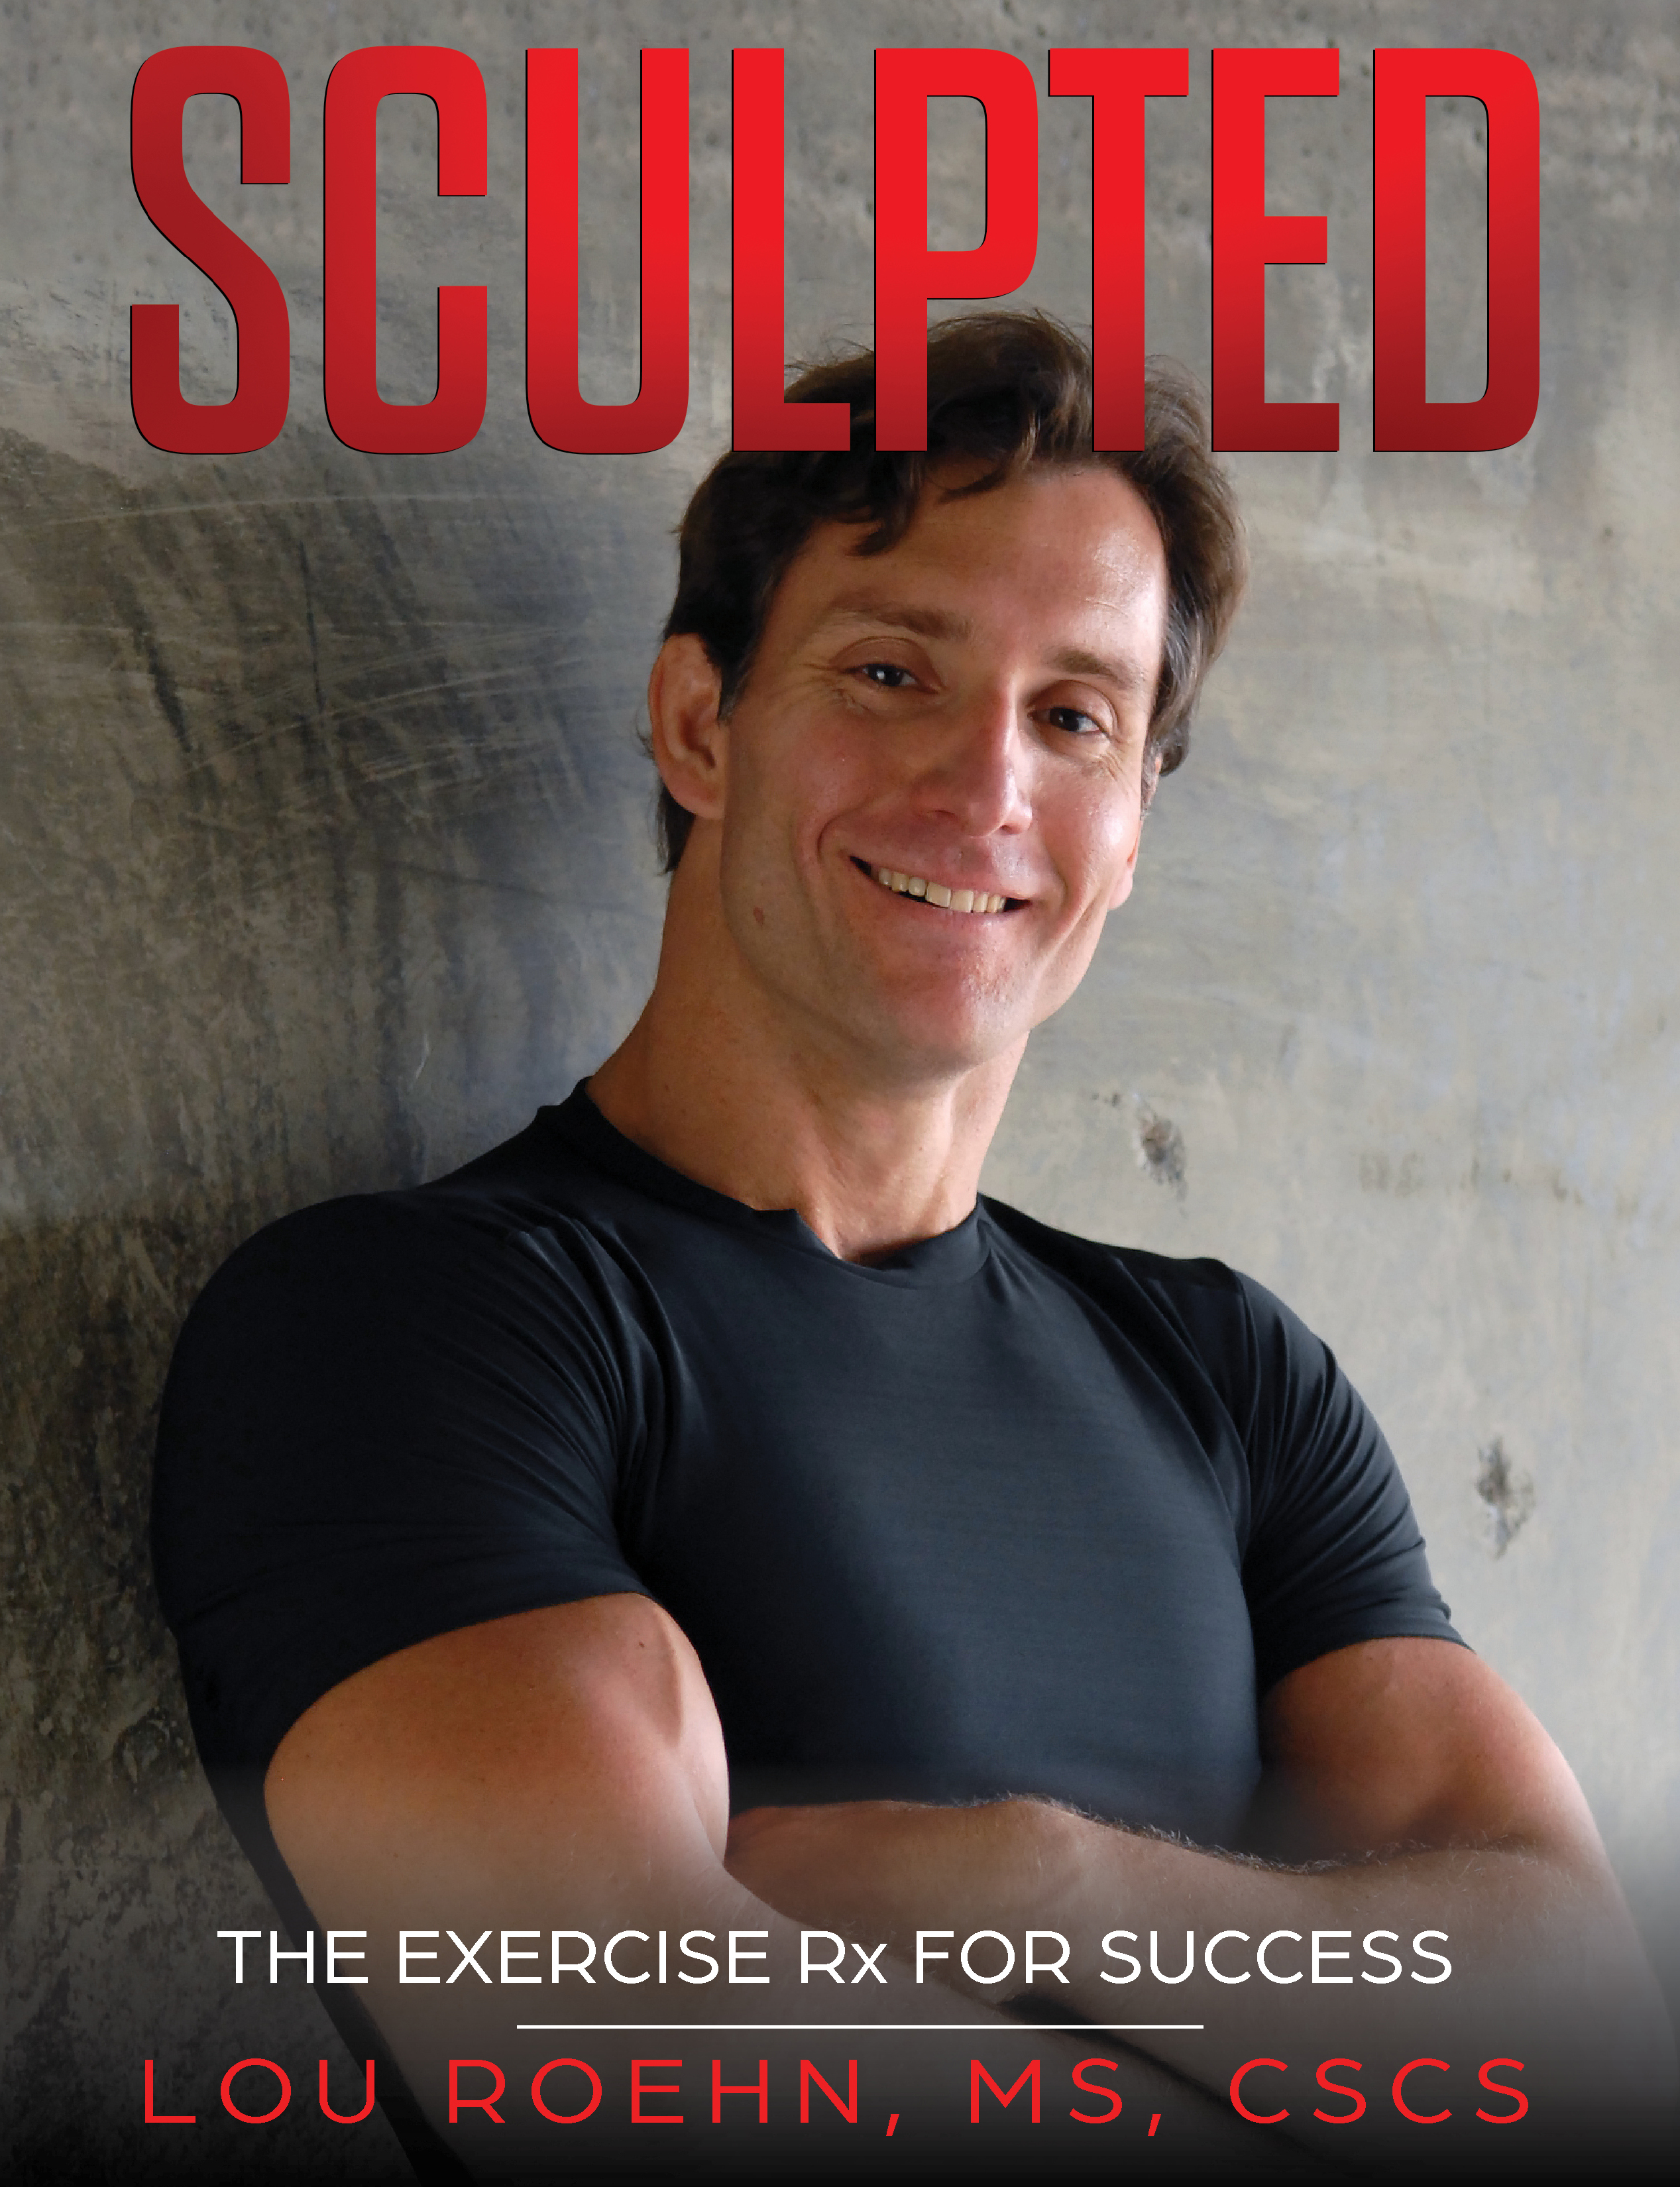 New Book Outlines Fitness Prescription from Experienced Exercise Physiologist, Body Builder and Fitness Trainer, Lou Roehn